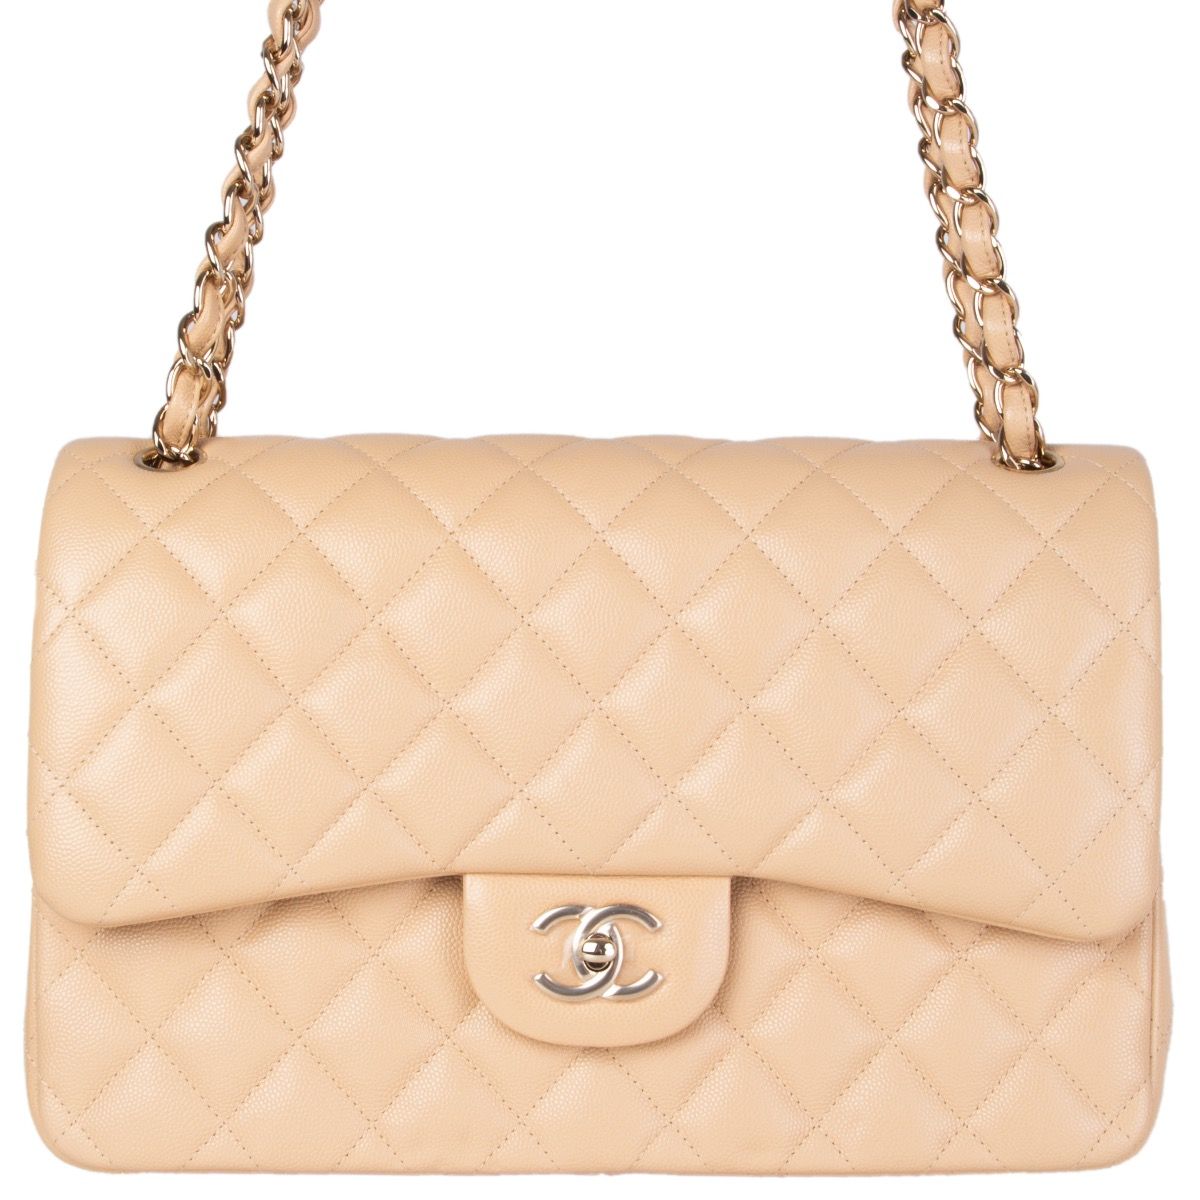 used chanel flap bag